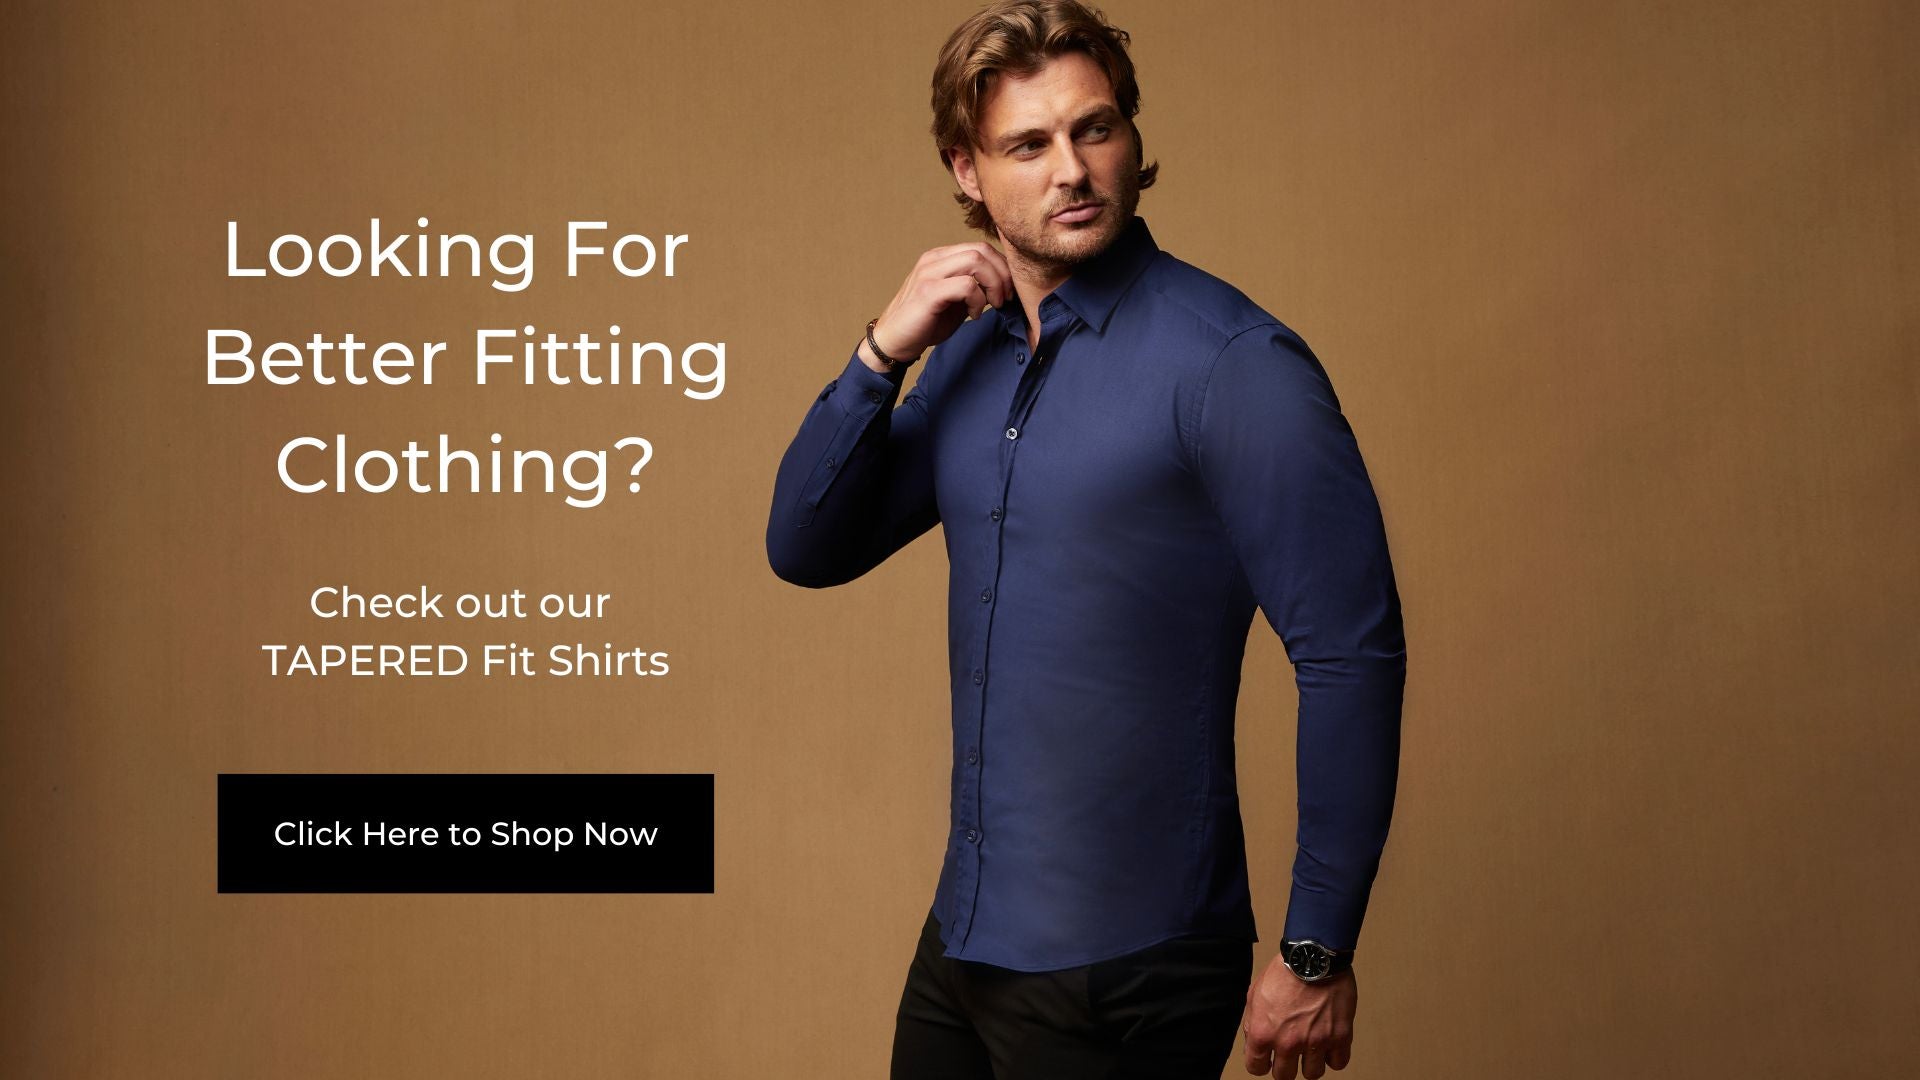 Fitted Vs Slim Fit - What’s The Difference? | Tapered Menswear